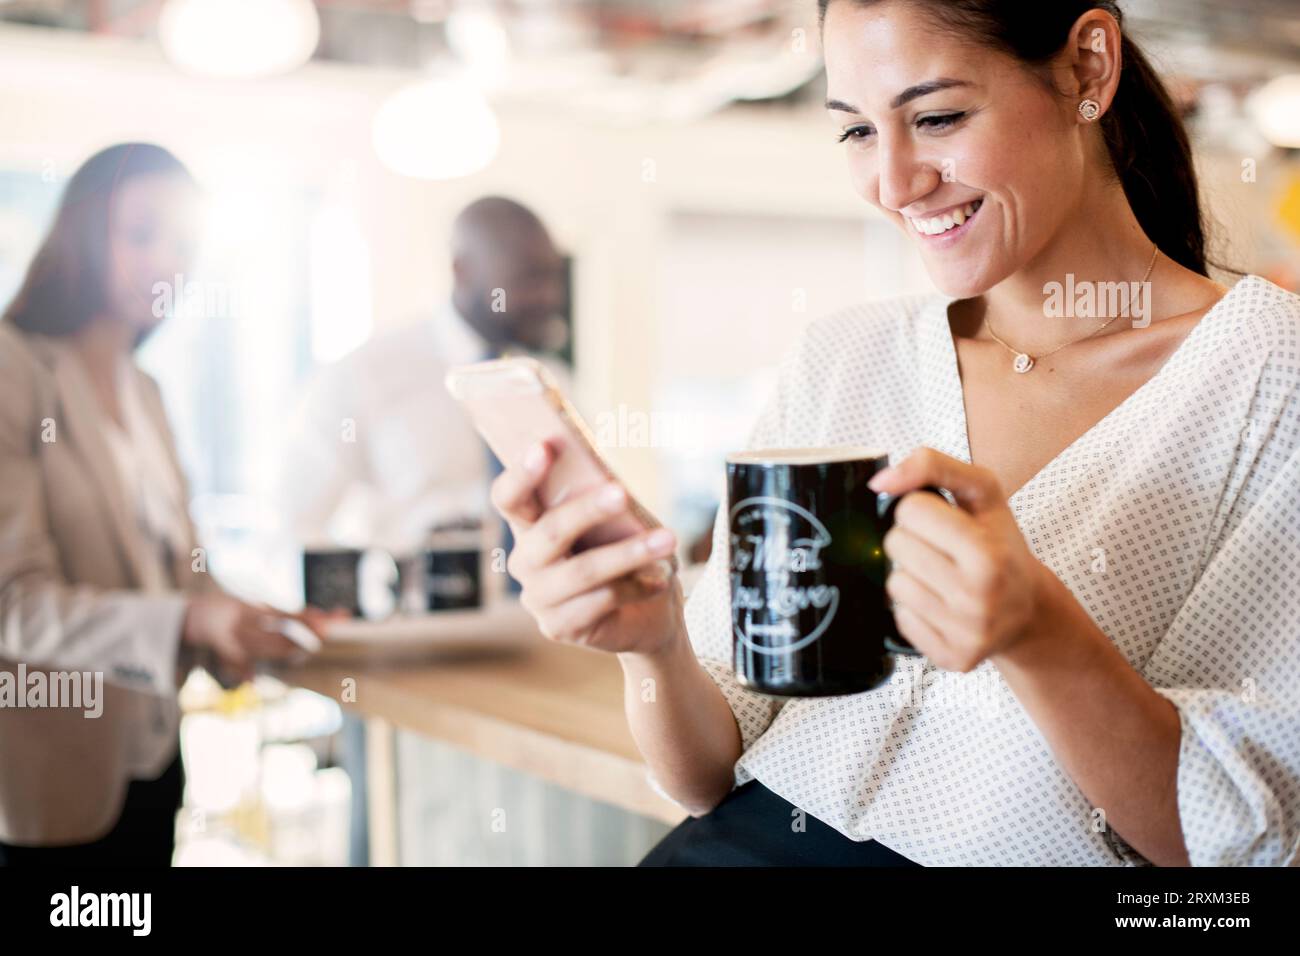 Businesswoman holding coffee cup and smart phone Stock Photo